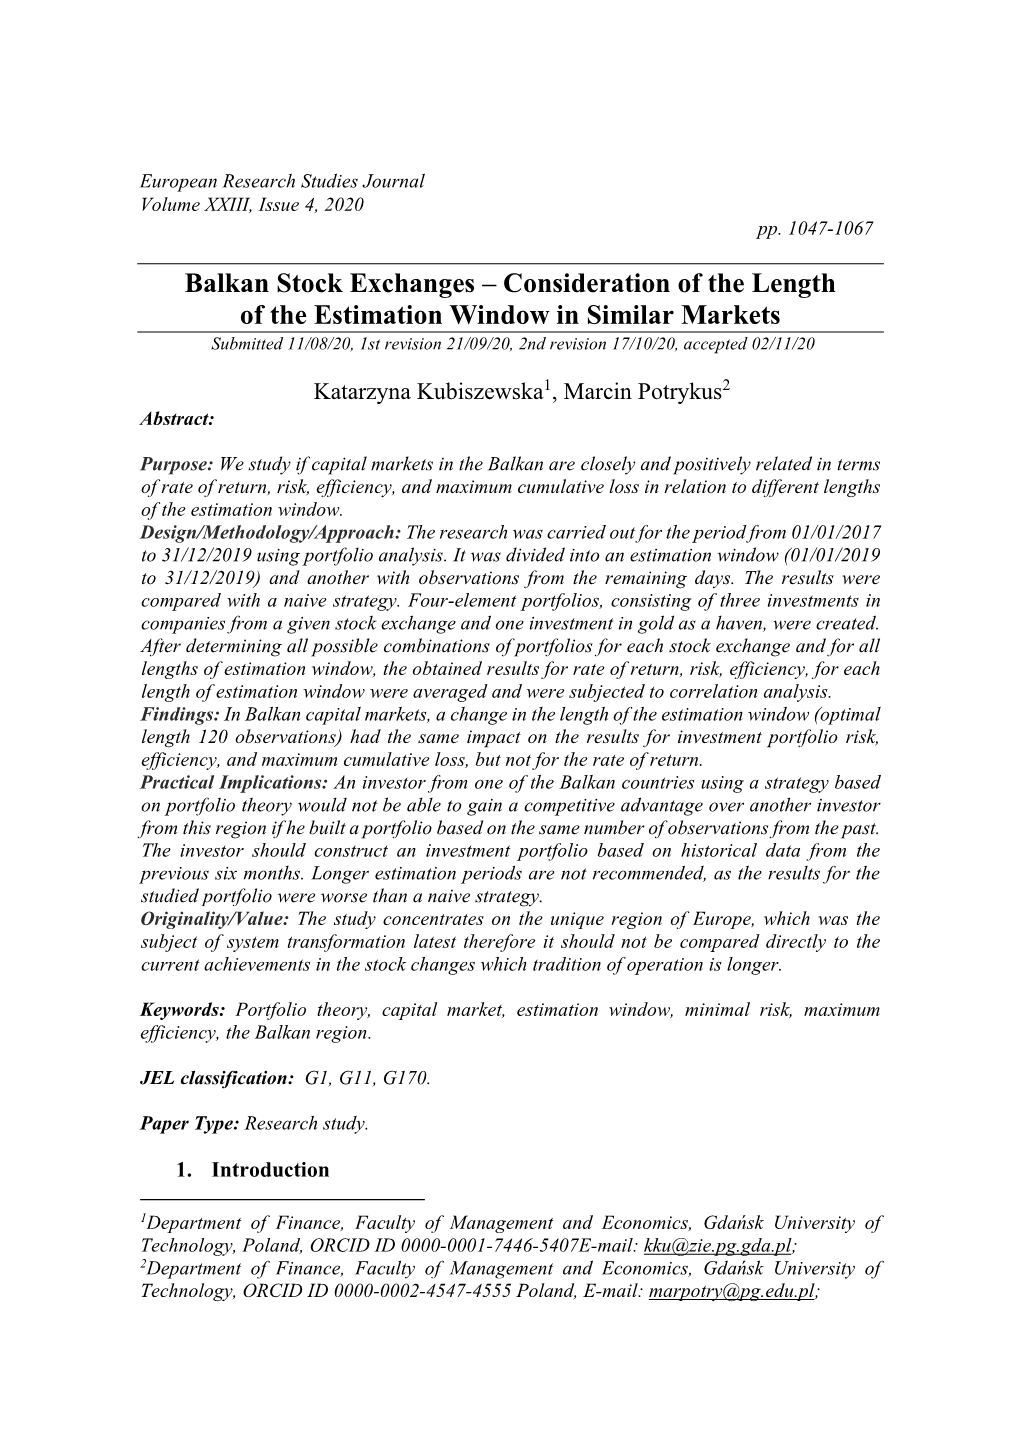 Balkan Stock Exchanges – Consideration of the Length of The